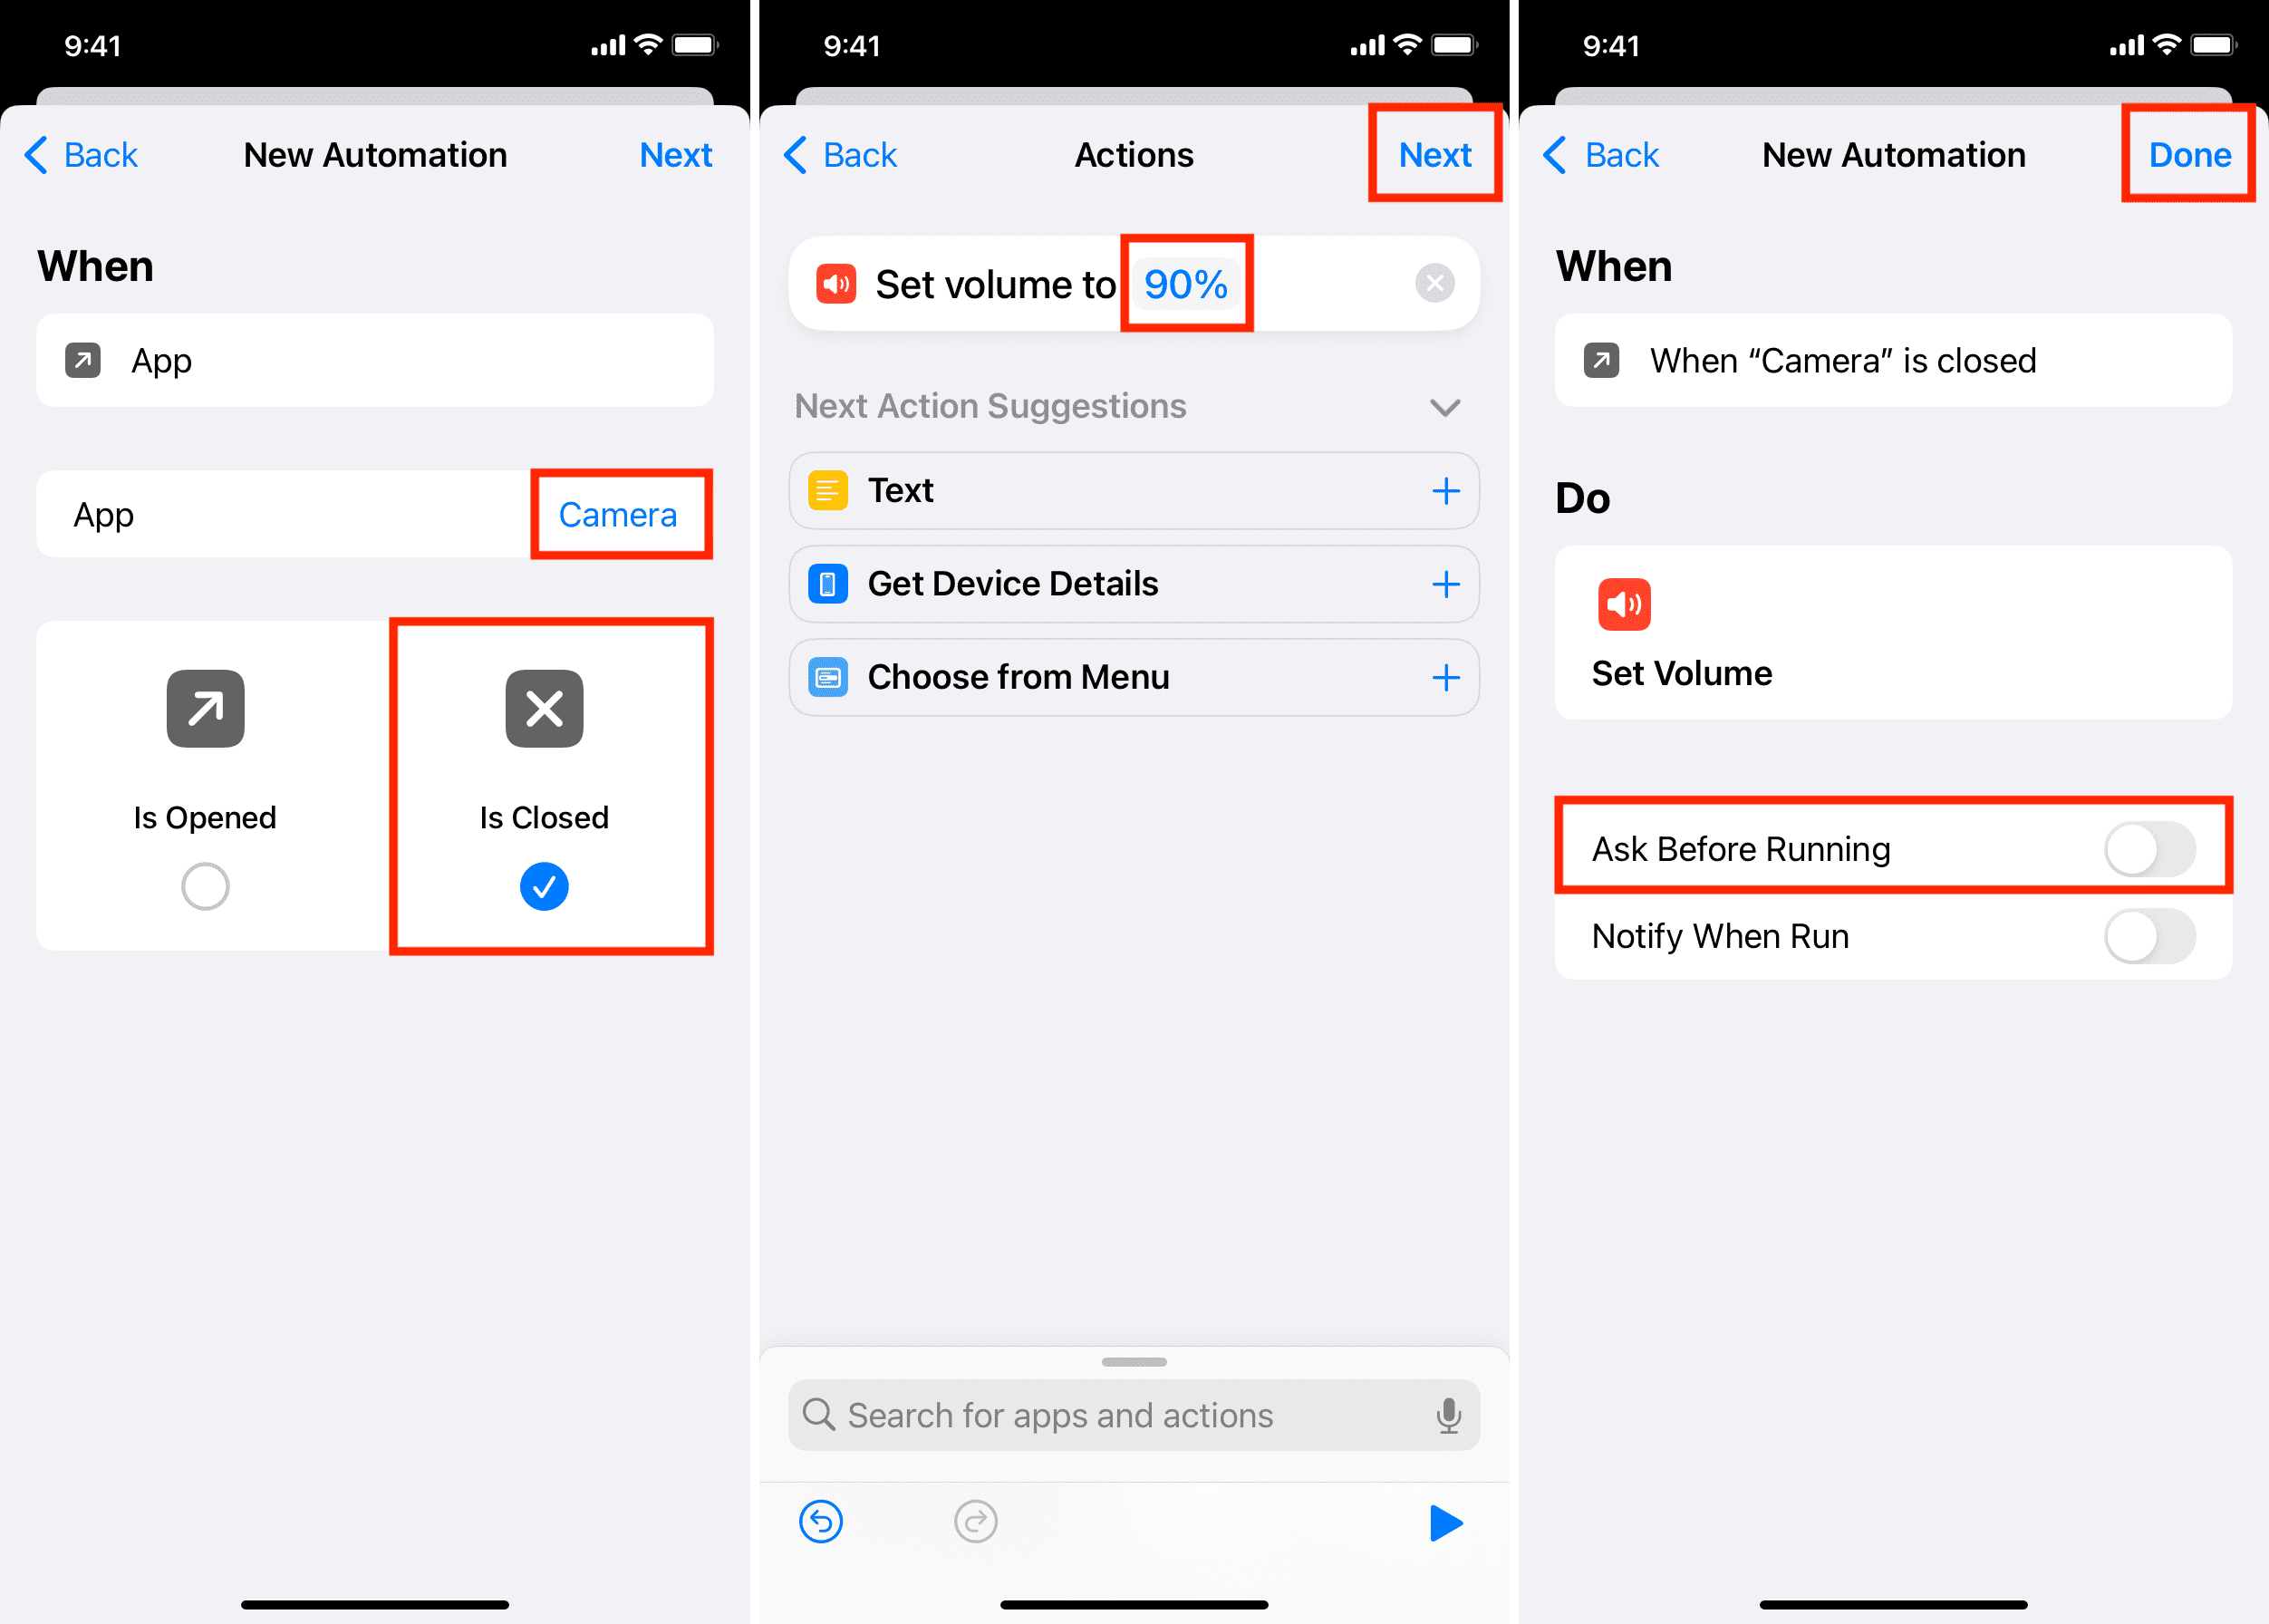 Automatically unmute iPhone sounds when camera is closed